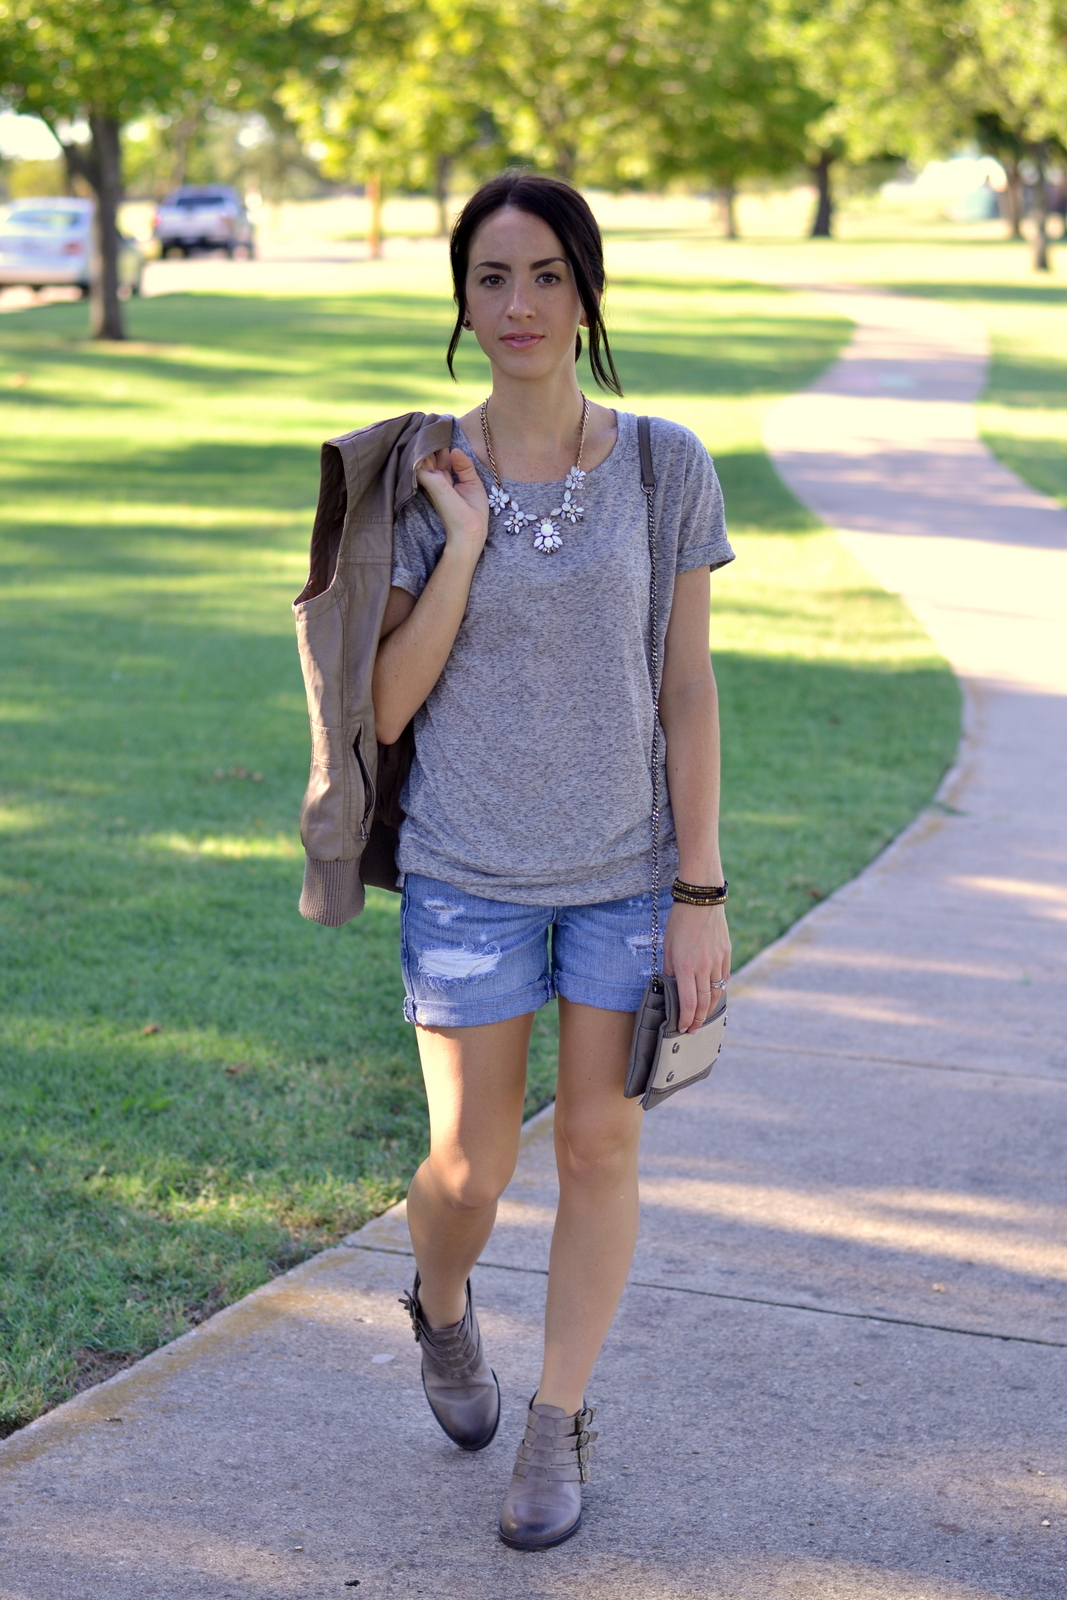 Boyfriend Shorts, Ankle Boots, Gray Tee